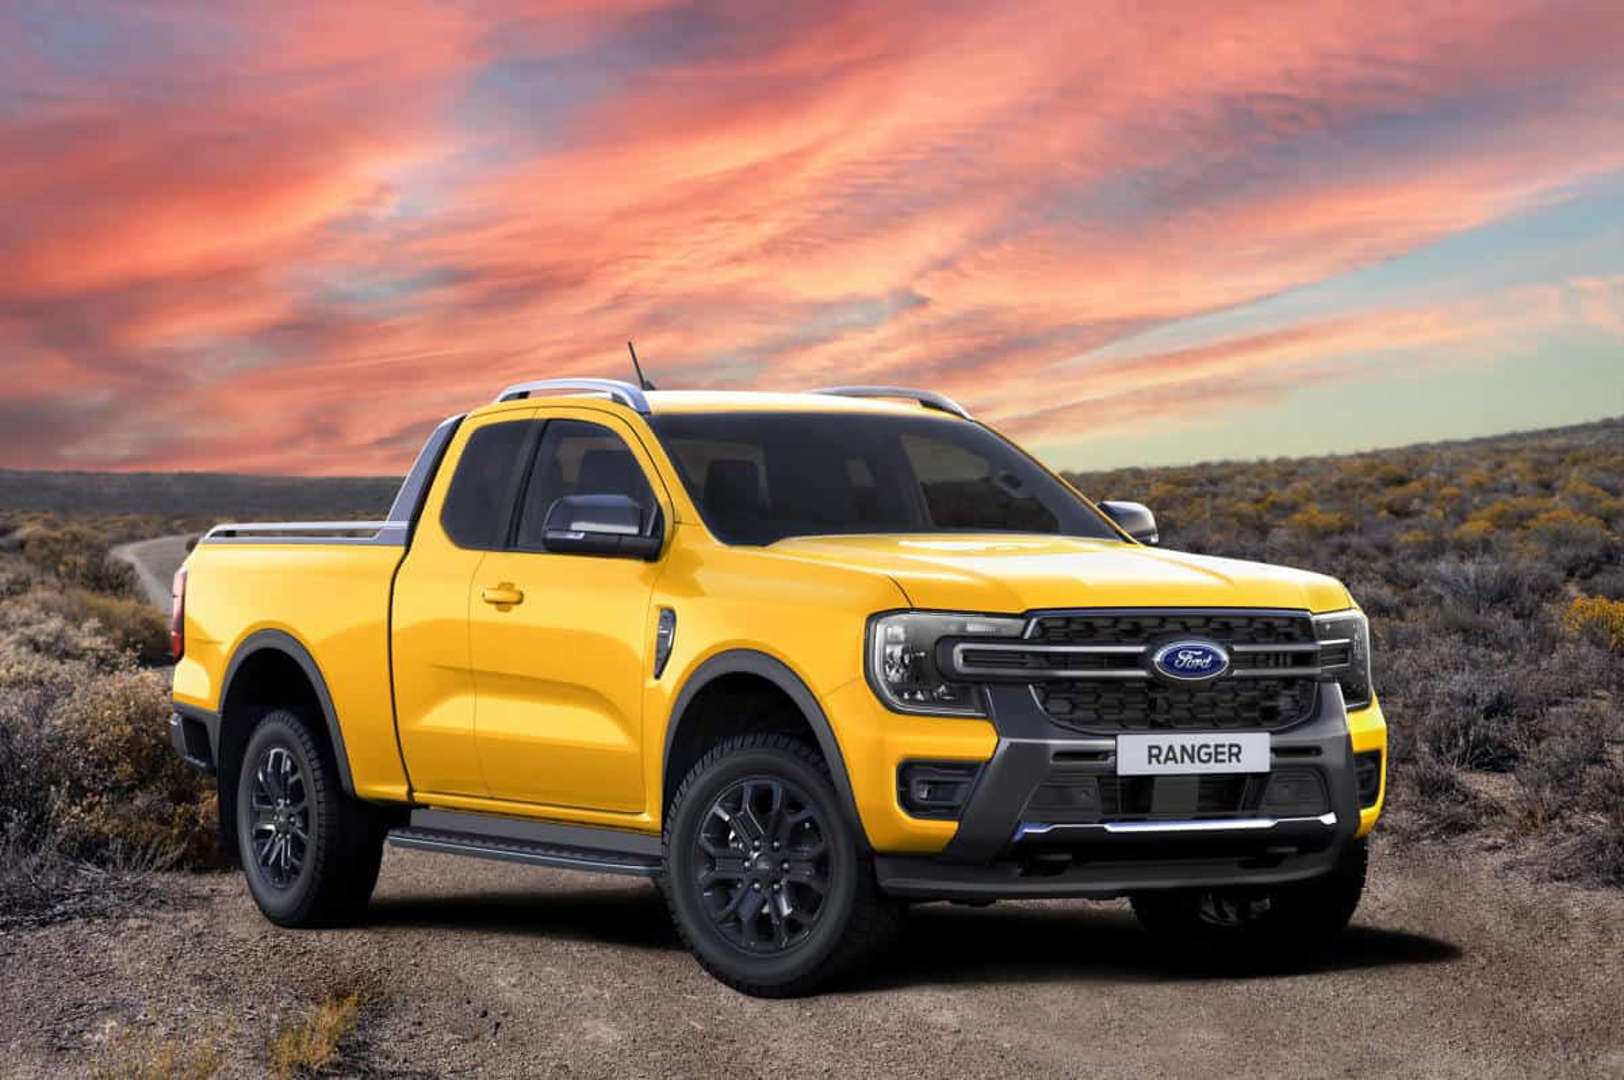 NextGeneration Ford Ranger Lineup Expands with Launch of Single Cab and SuperCab Models